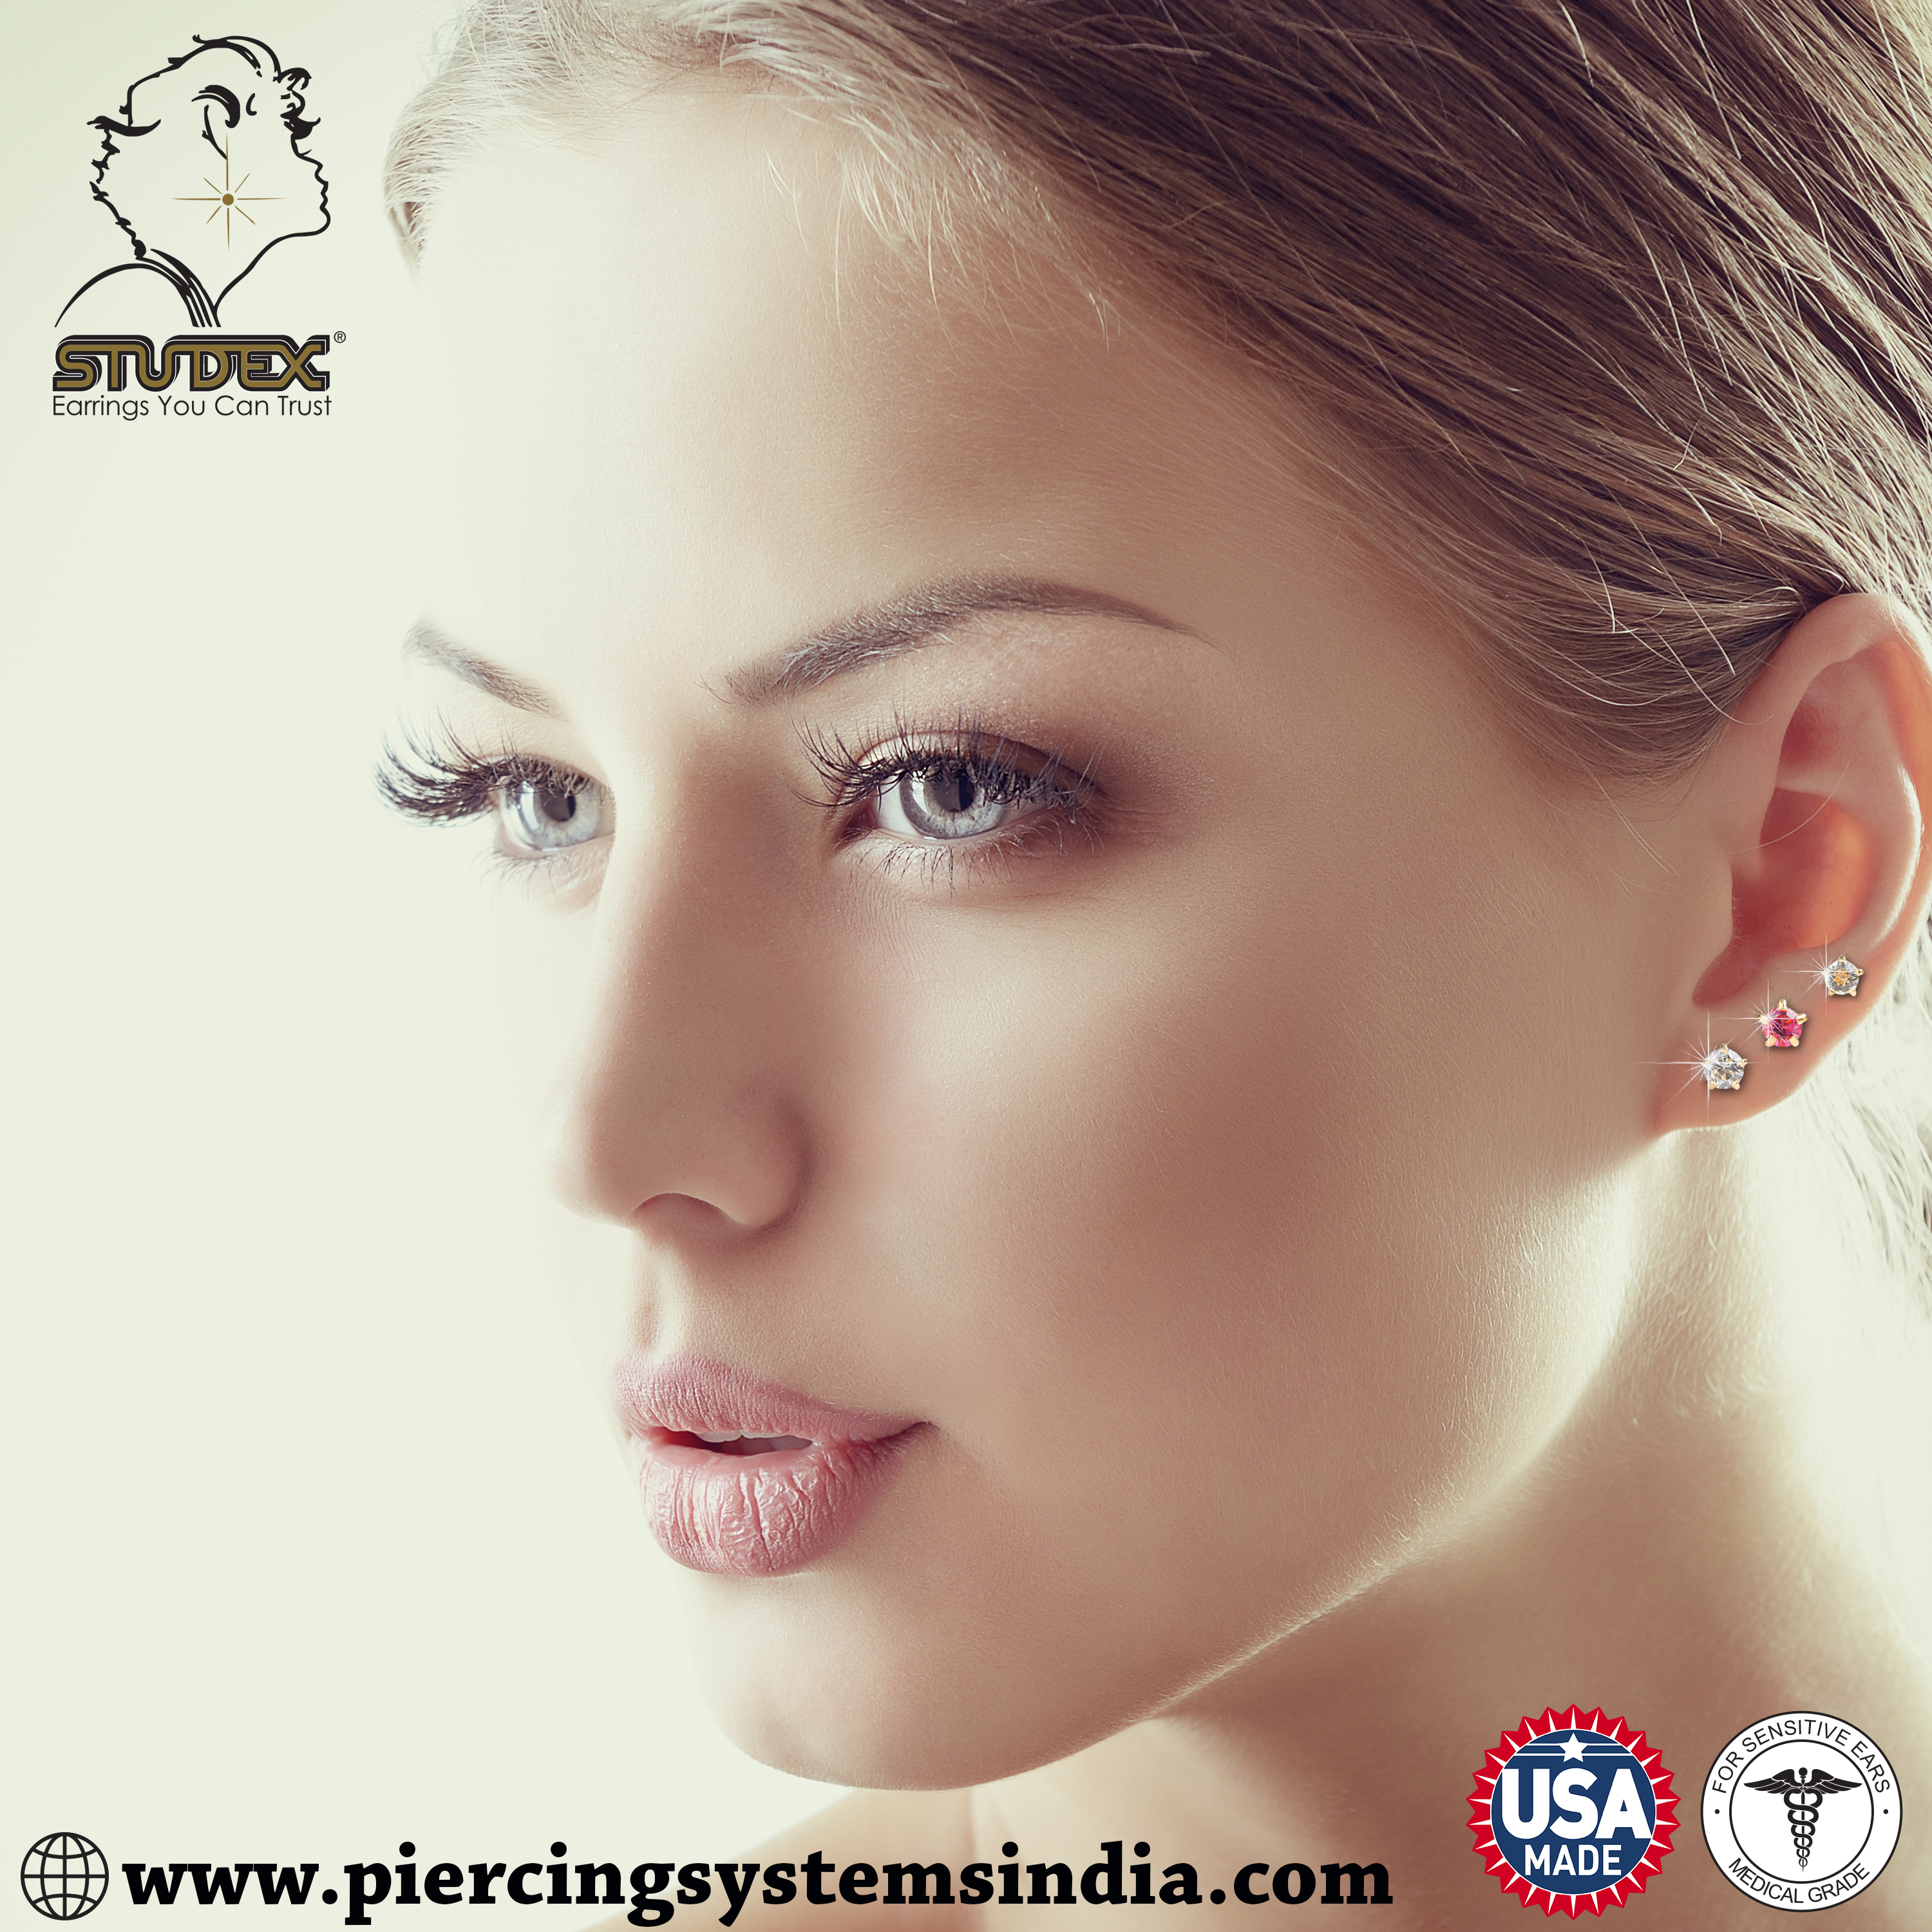 Studex Asia Lots of new allergy free ear studs available on our Brand new website. Mix & match to create your own unique collection… shop now!